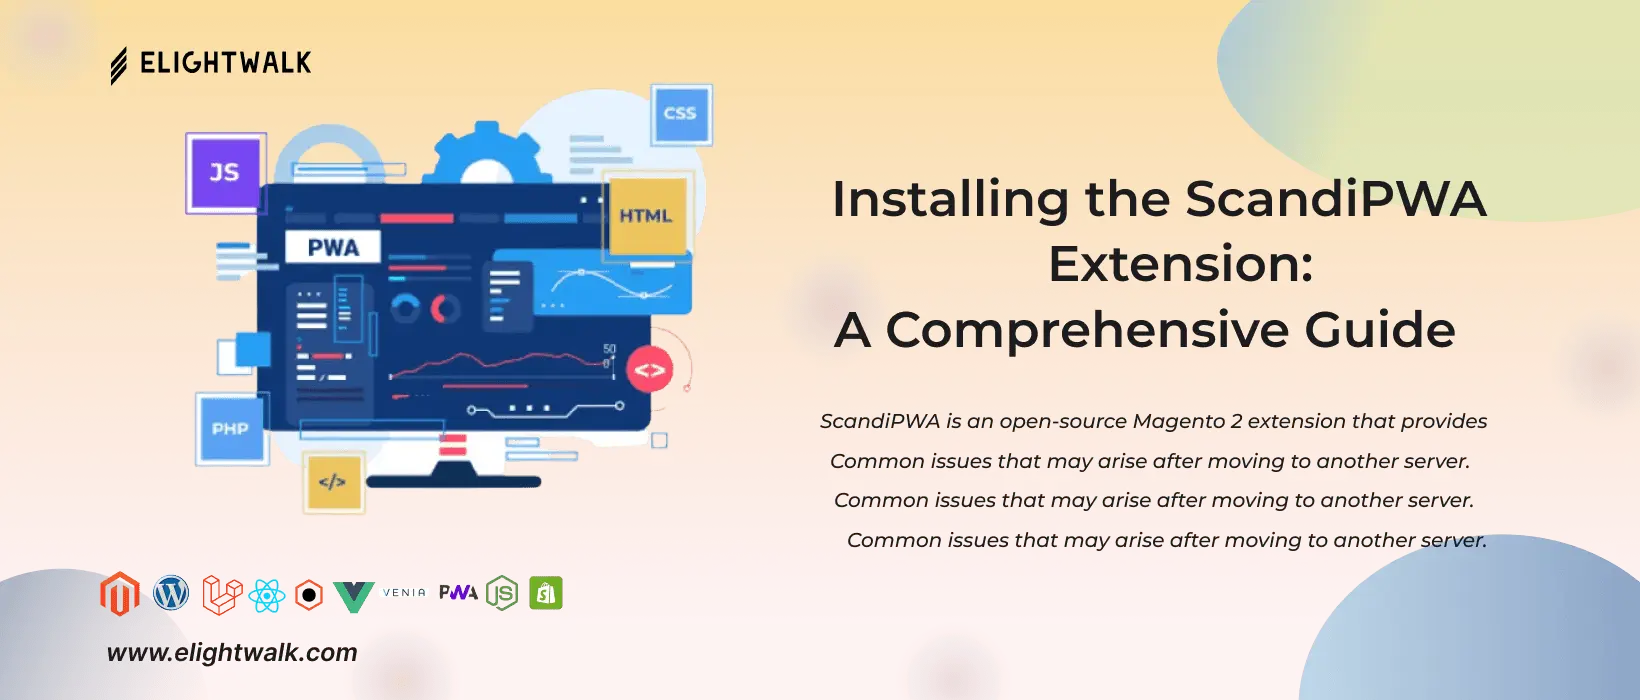 Installing the ScandiPWA Extension: A Comprehensive Guide